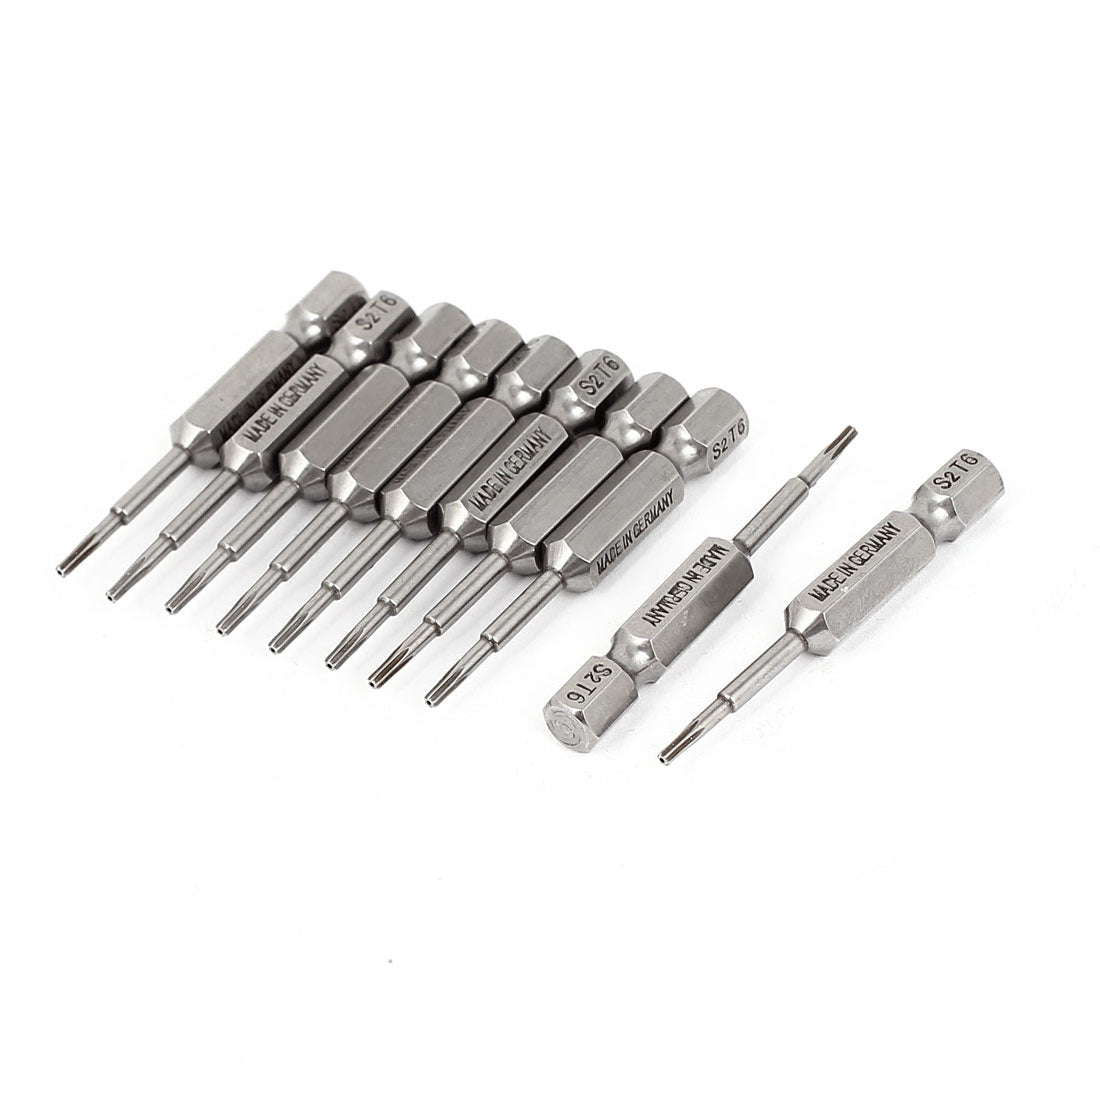 uxcell Uxcell 1/4" Hex Shank 1.5mm Tip T6 Magnetic S2 Steel Torx Security Screwdriver Bits 10pcs